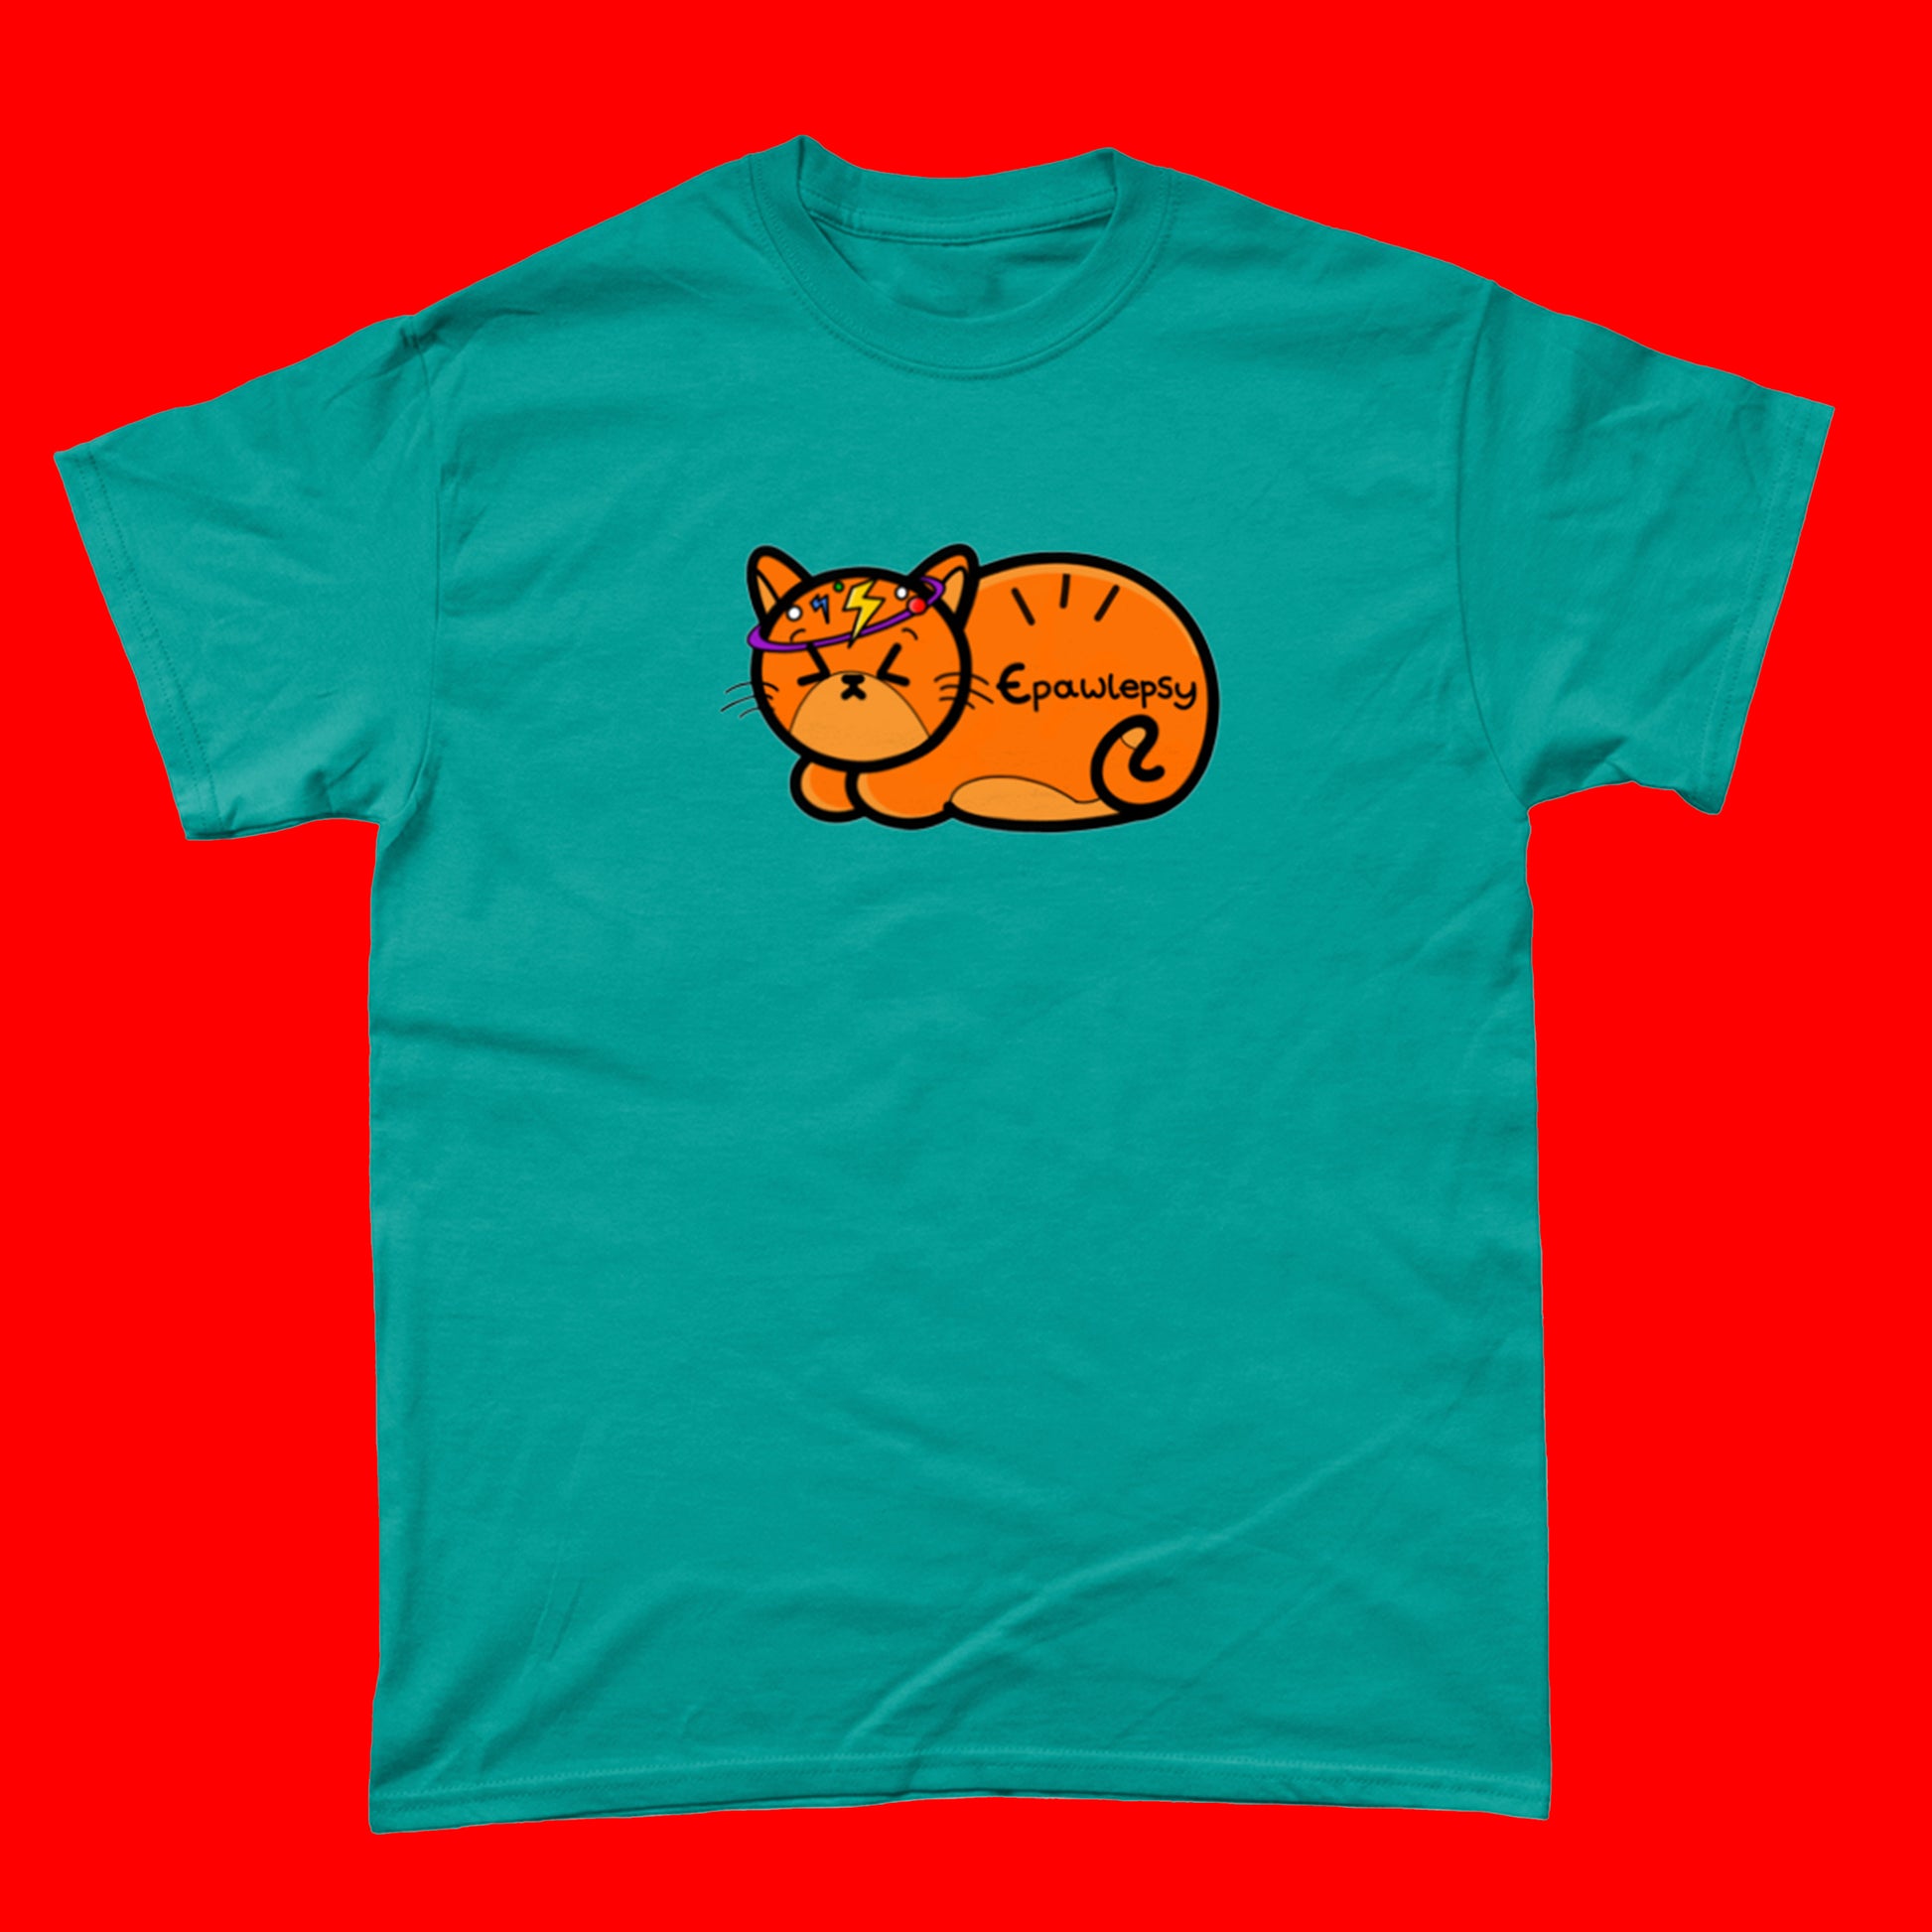 Epawlepsy Tee - Epilepsy. The antique jade cotton t-shirt is a ginger cat with eyes scrunched closed and symbols to represent a dizzy spell drawn across his head. Epawlepsy is written on the cats stomach. Tee is designed to raise awareness for epilepsy